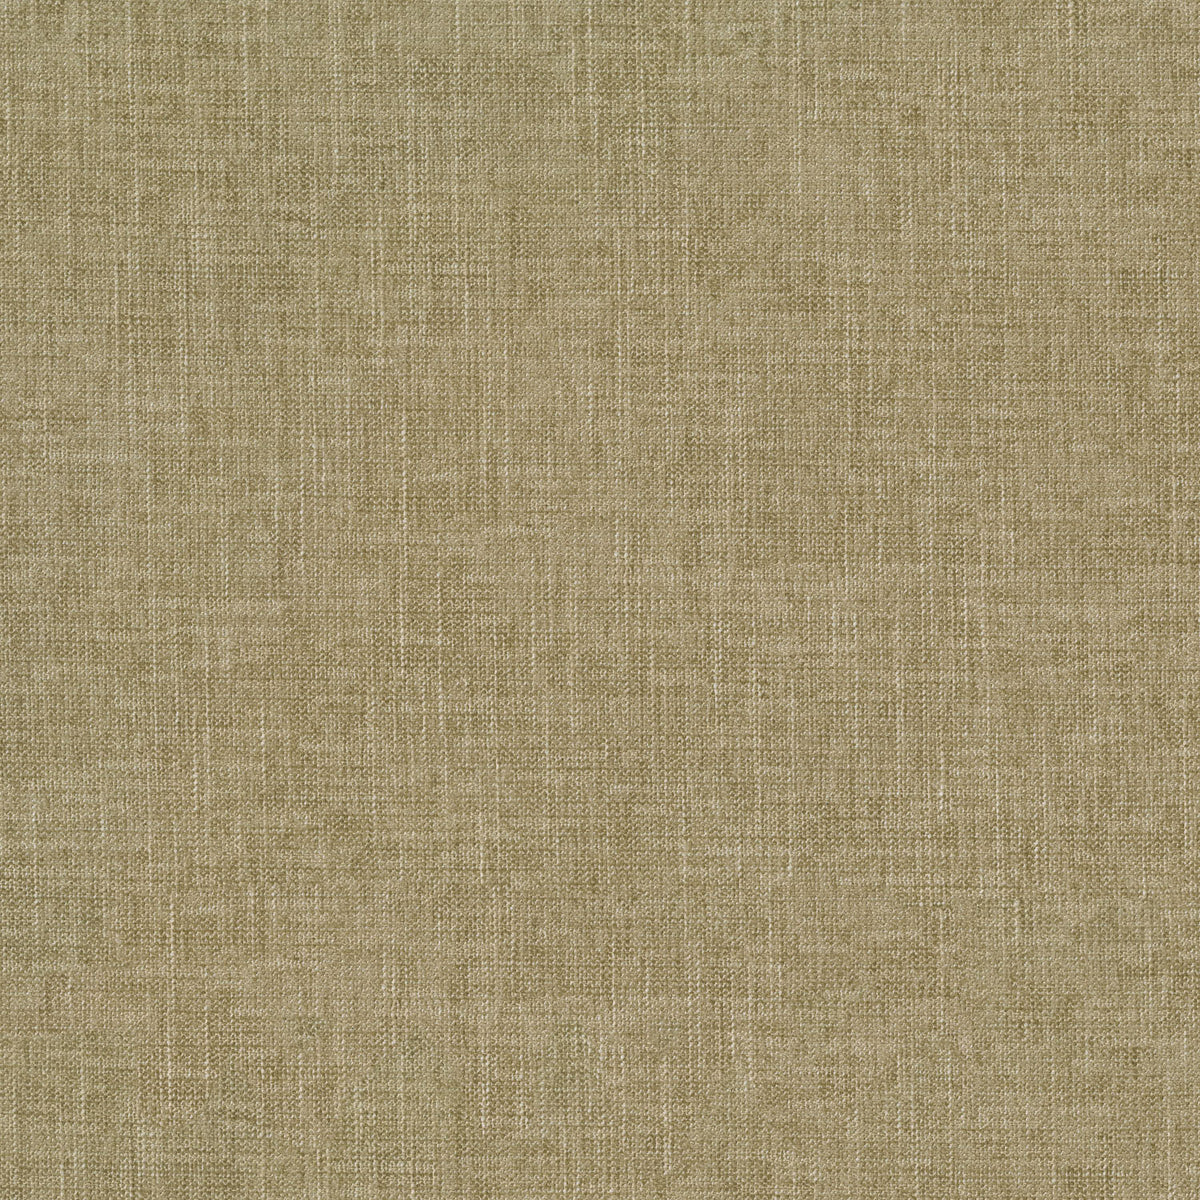 Performance + Remy - Linen 409423 Upholstery Fabric